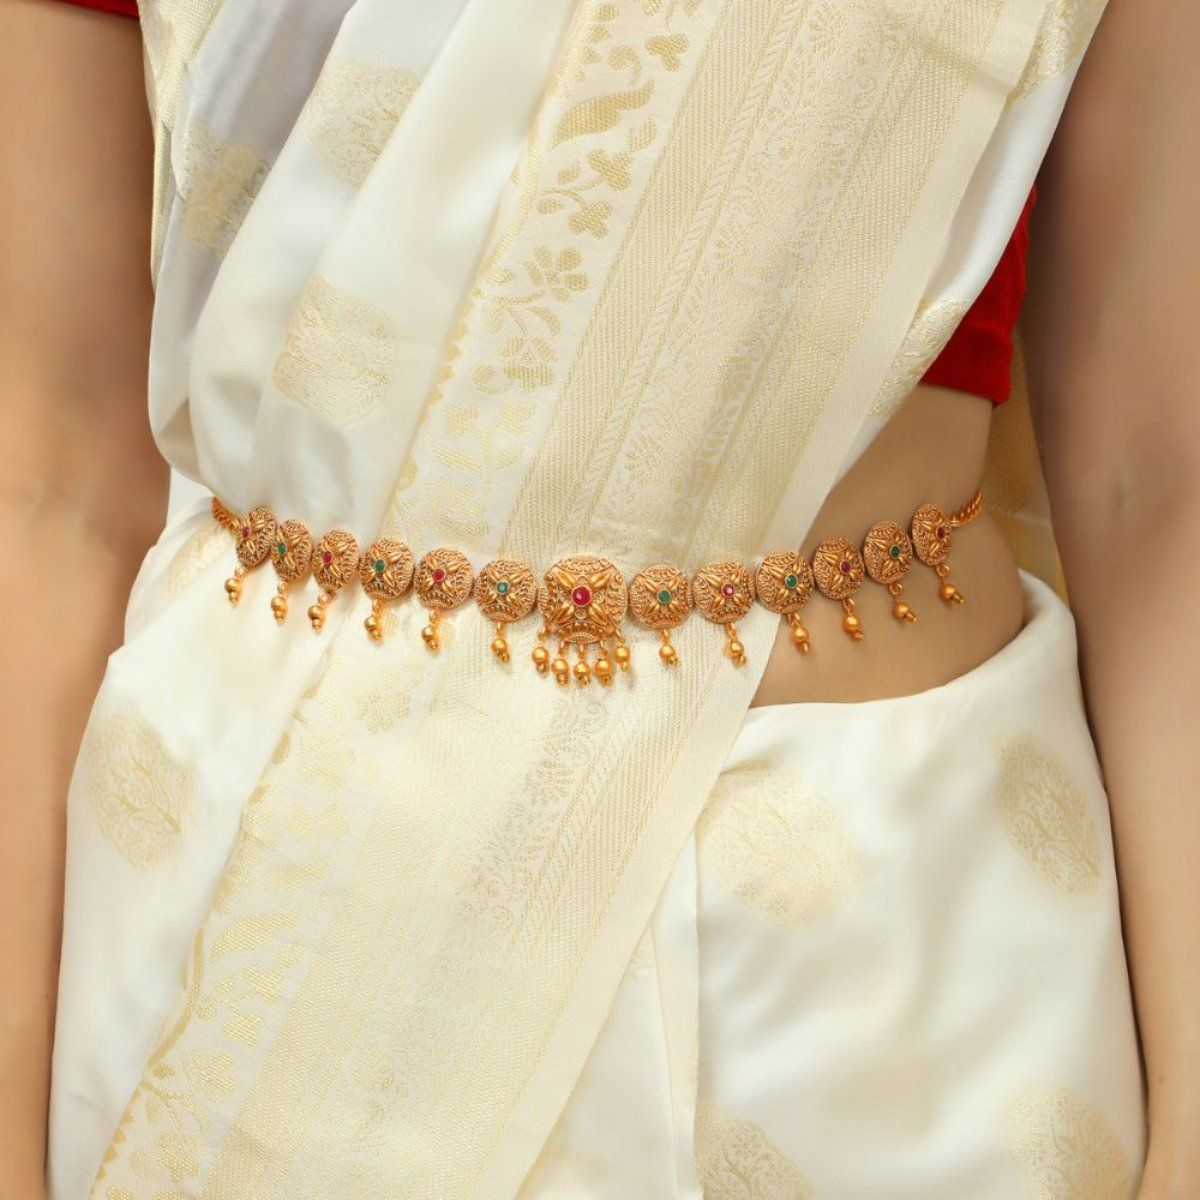 Buy Accessher Gold Plated Stones Studded Waist Belt Bridal